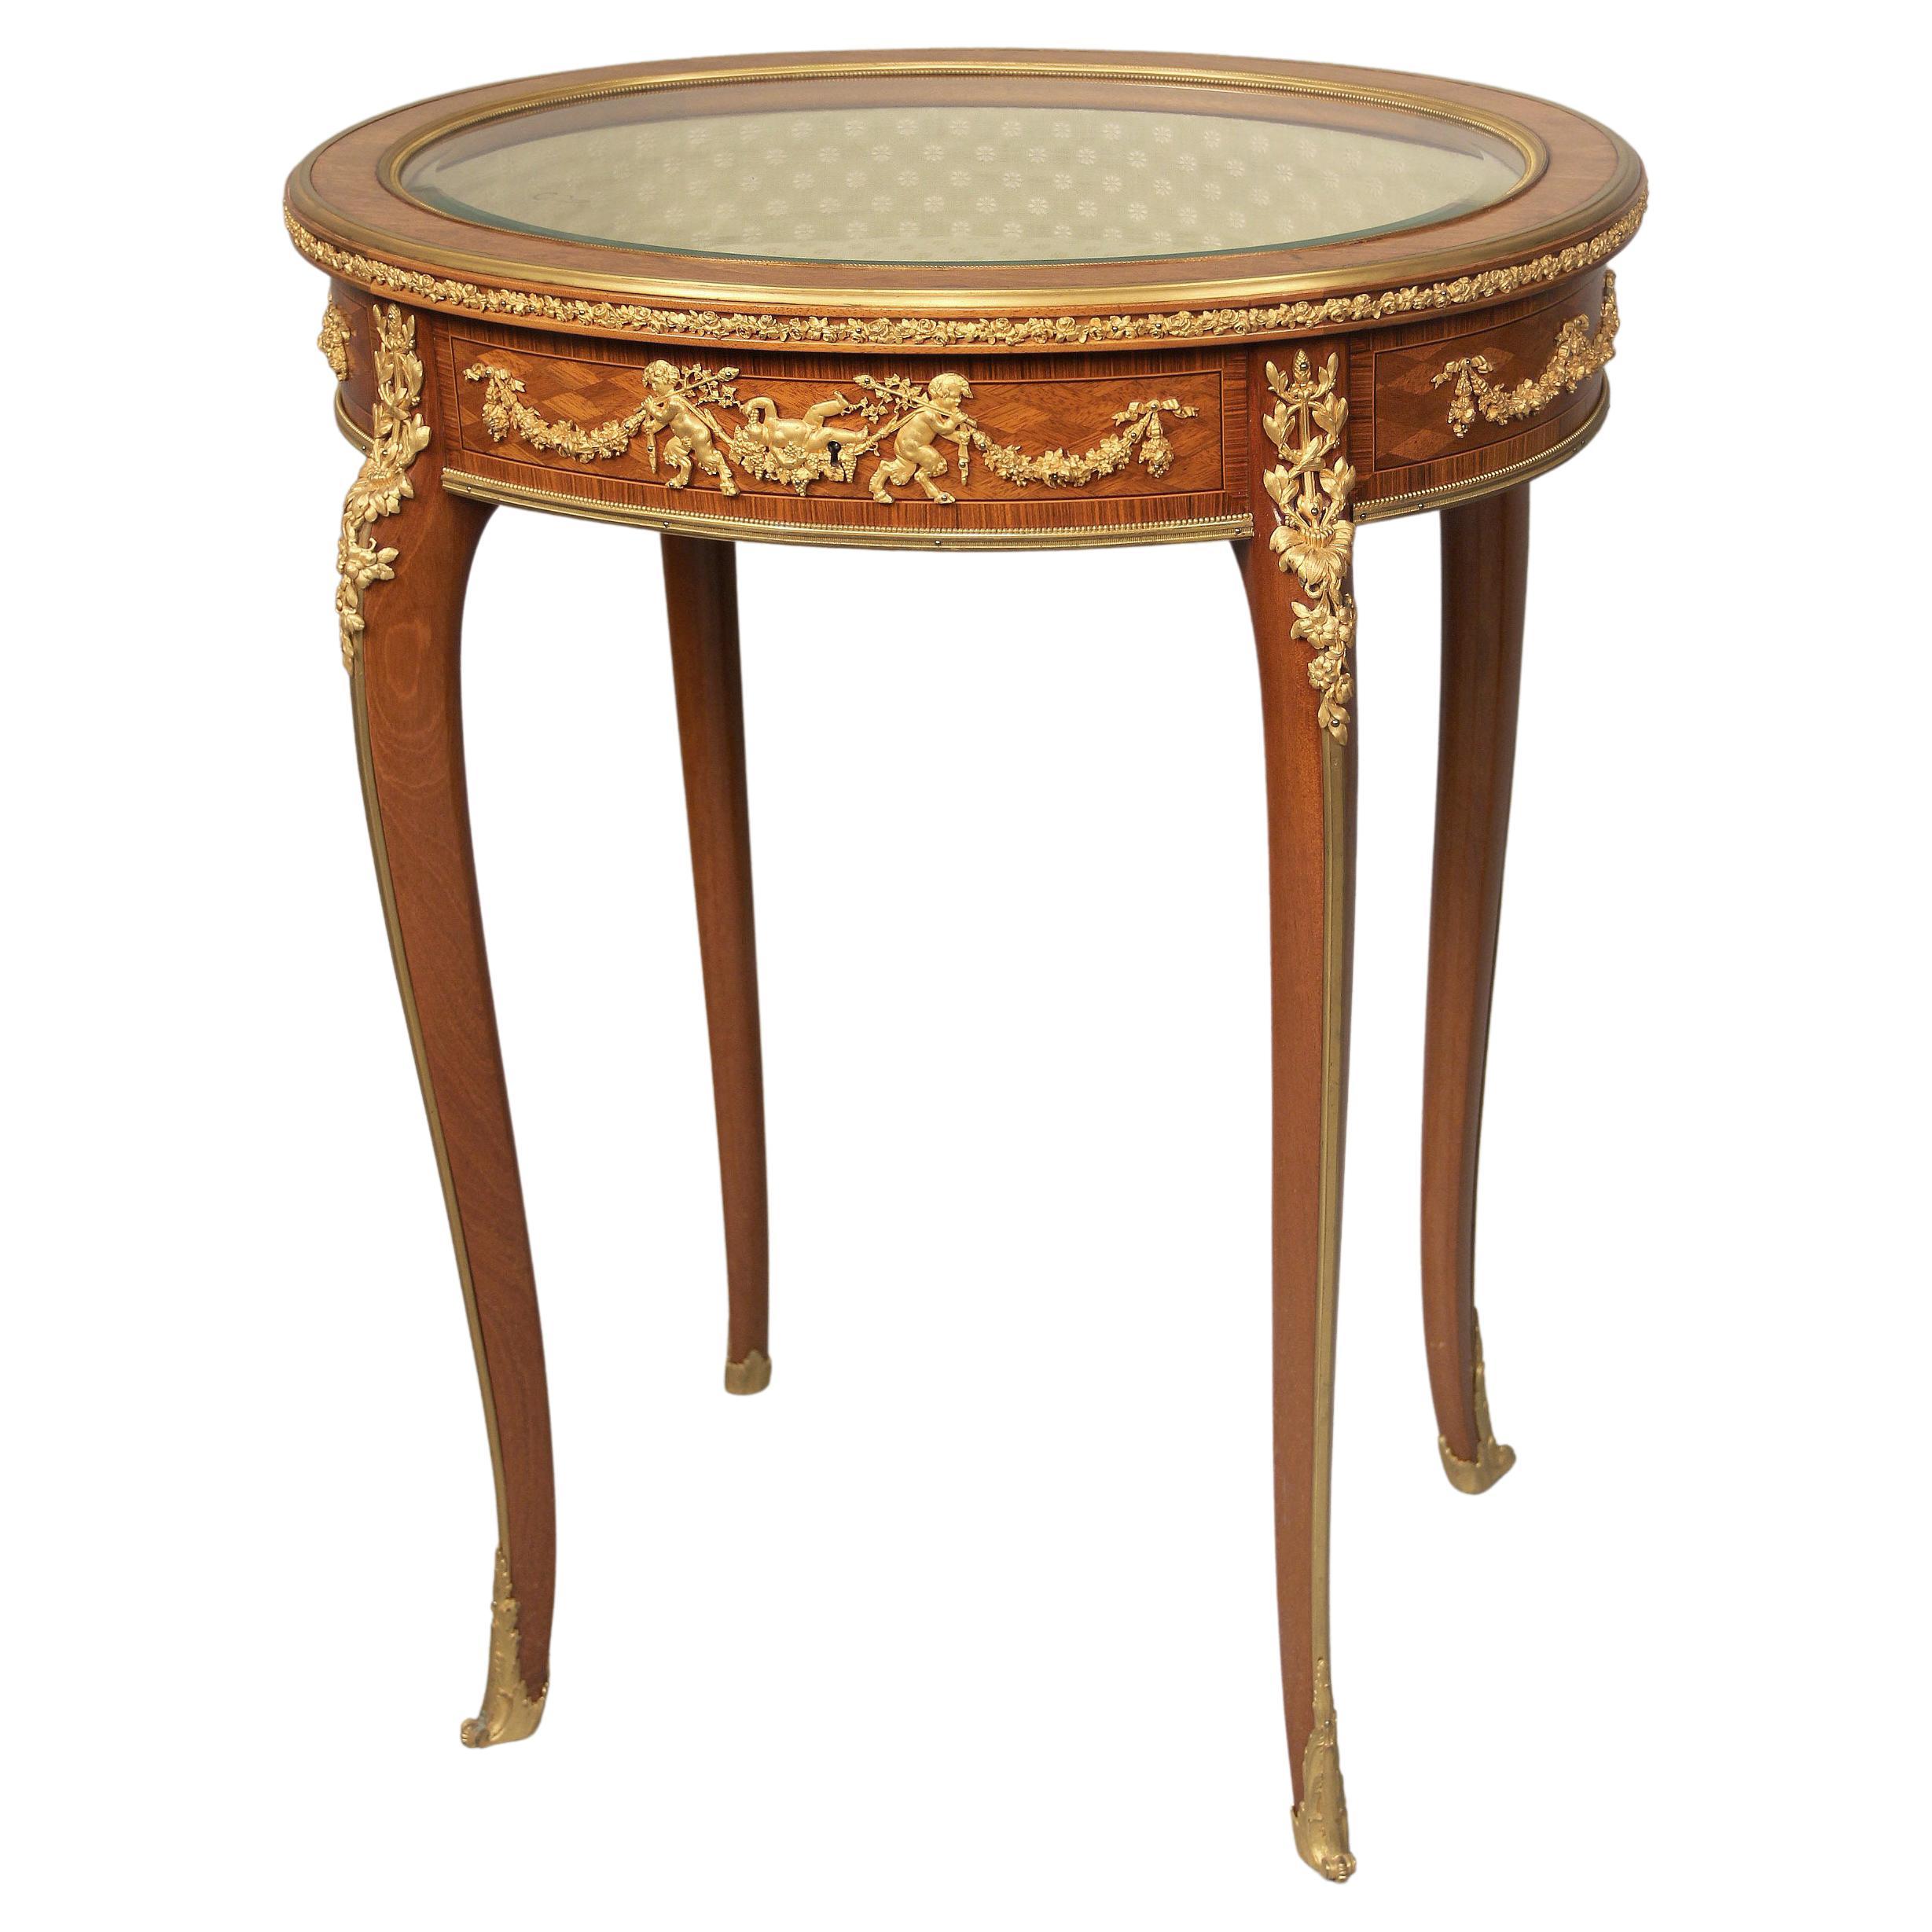 Early 20th Century Gilt Bronze Mounted Parquetry Vitrine Table by François Linke For Sale